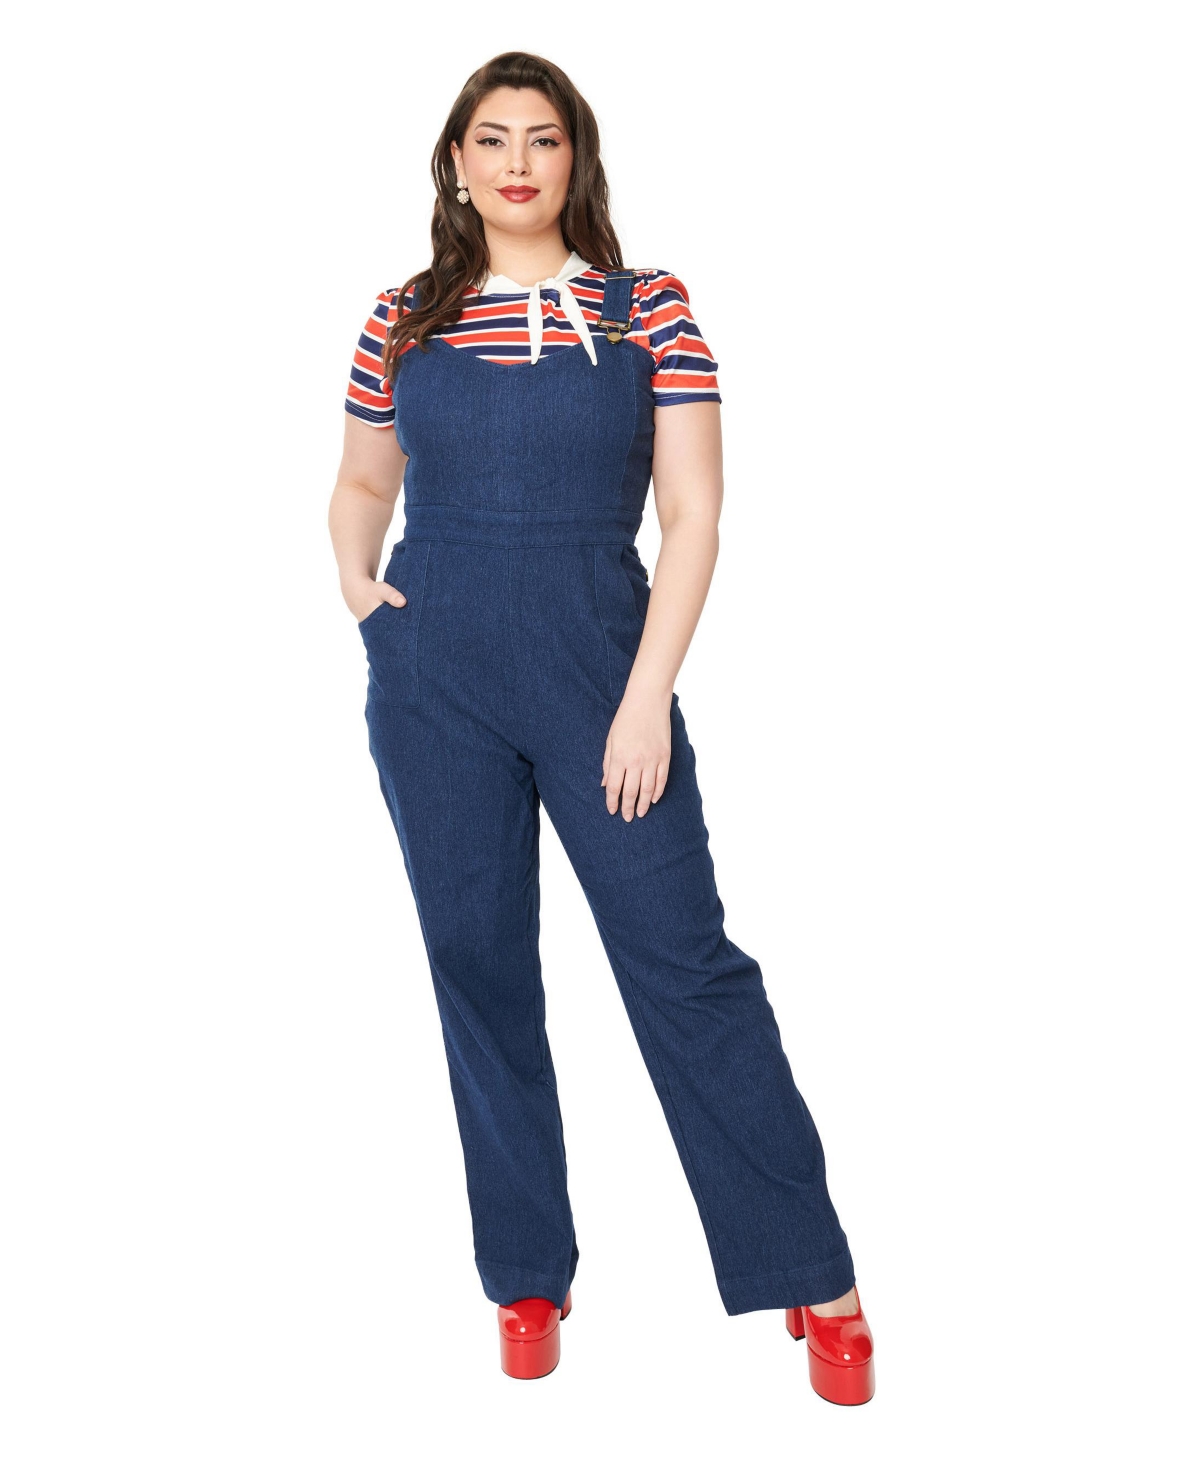 Plus Size Wide Leg Overall Dungaree Pants - Denim